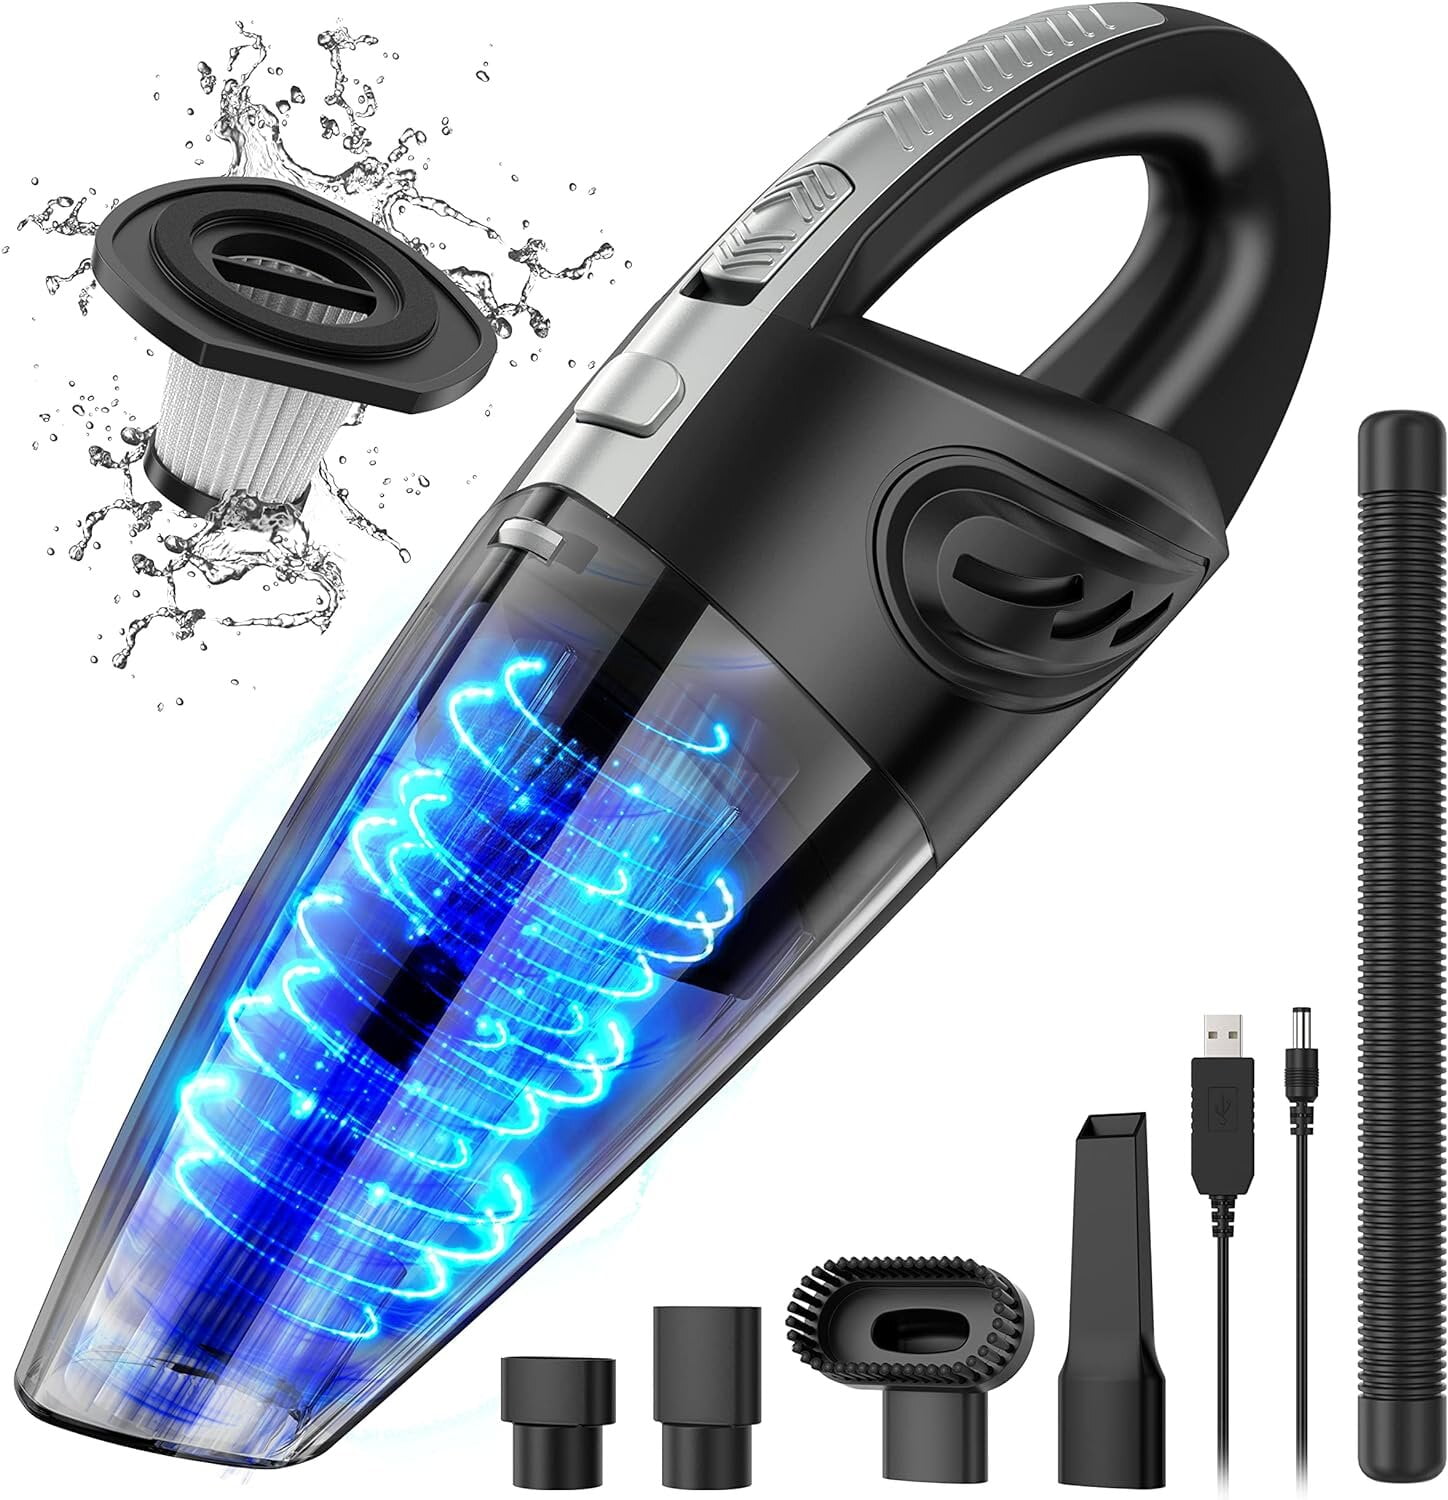 MroTech Car Vacuum Cleaner,Wireless Handheld Car Vacuum High Power Portable  Cordless Battery Powered Car Cleaning Kit USB Rechargeable Small Portable